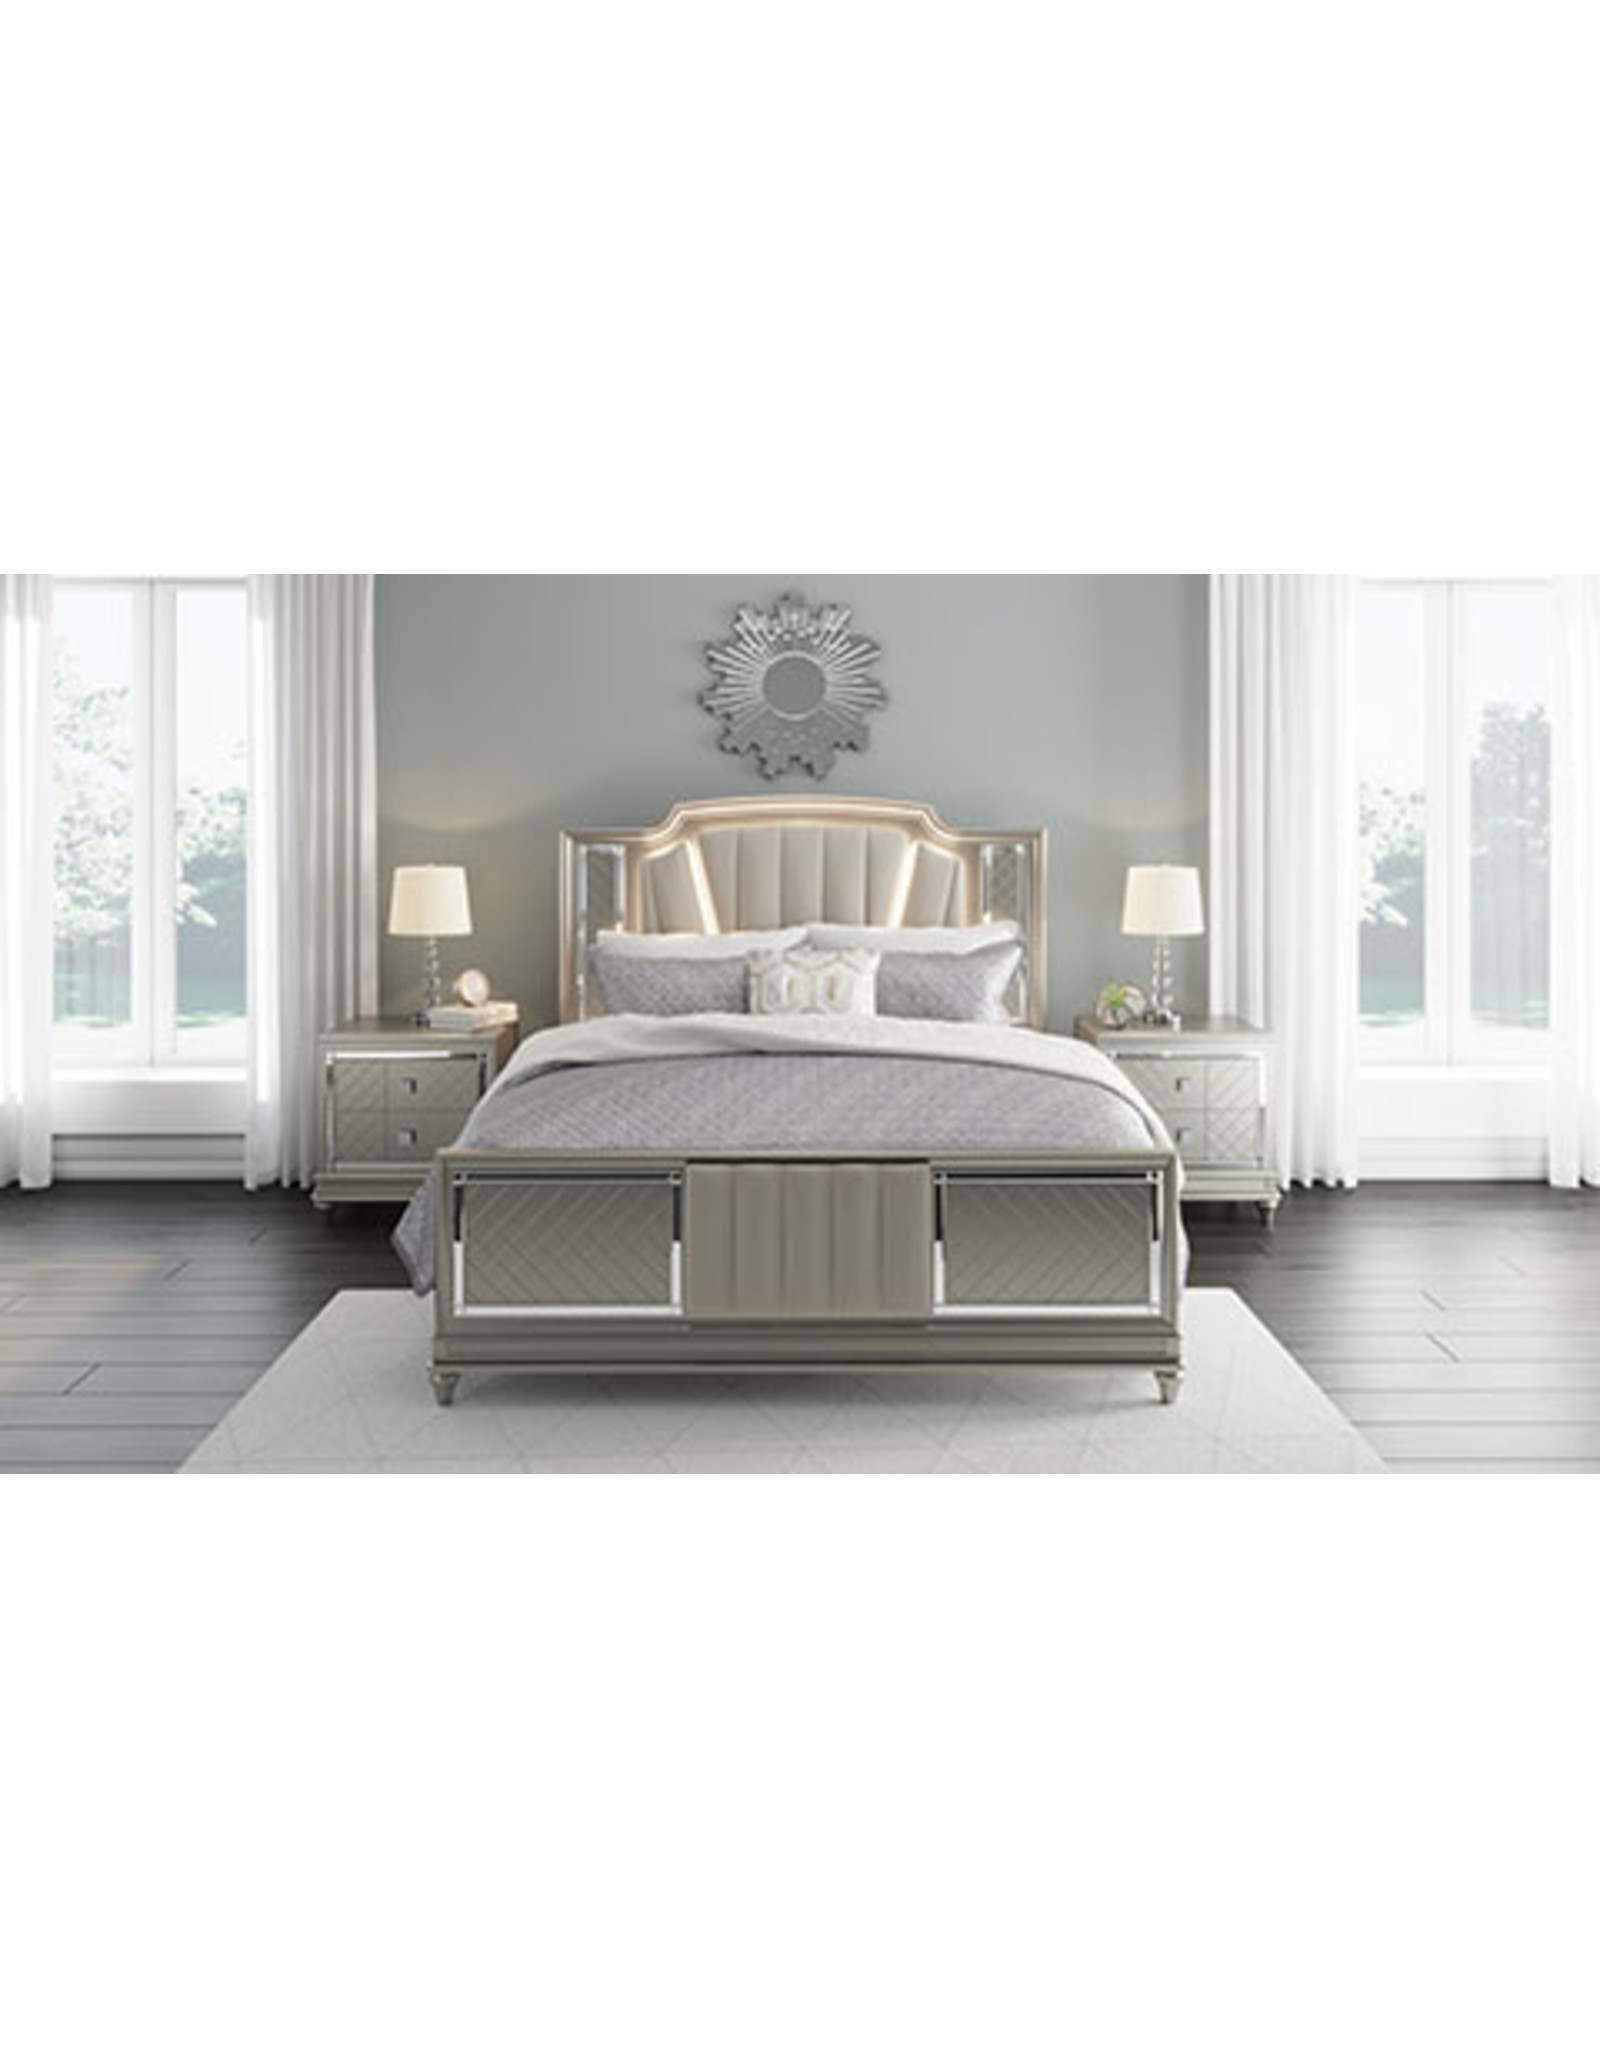 chevanna B744-58/56 King Bed